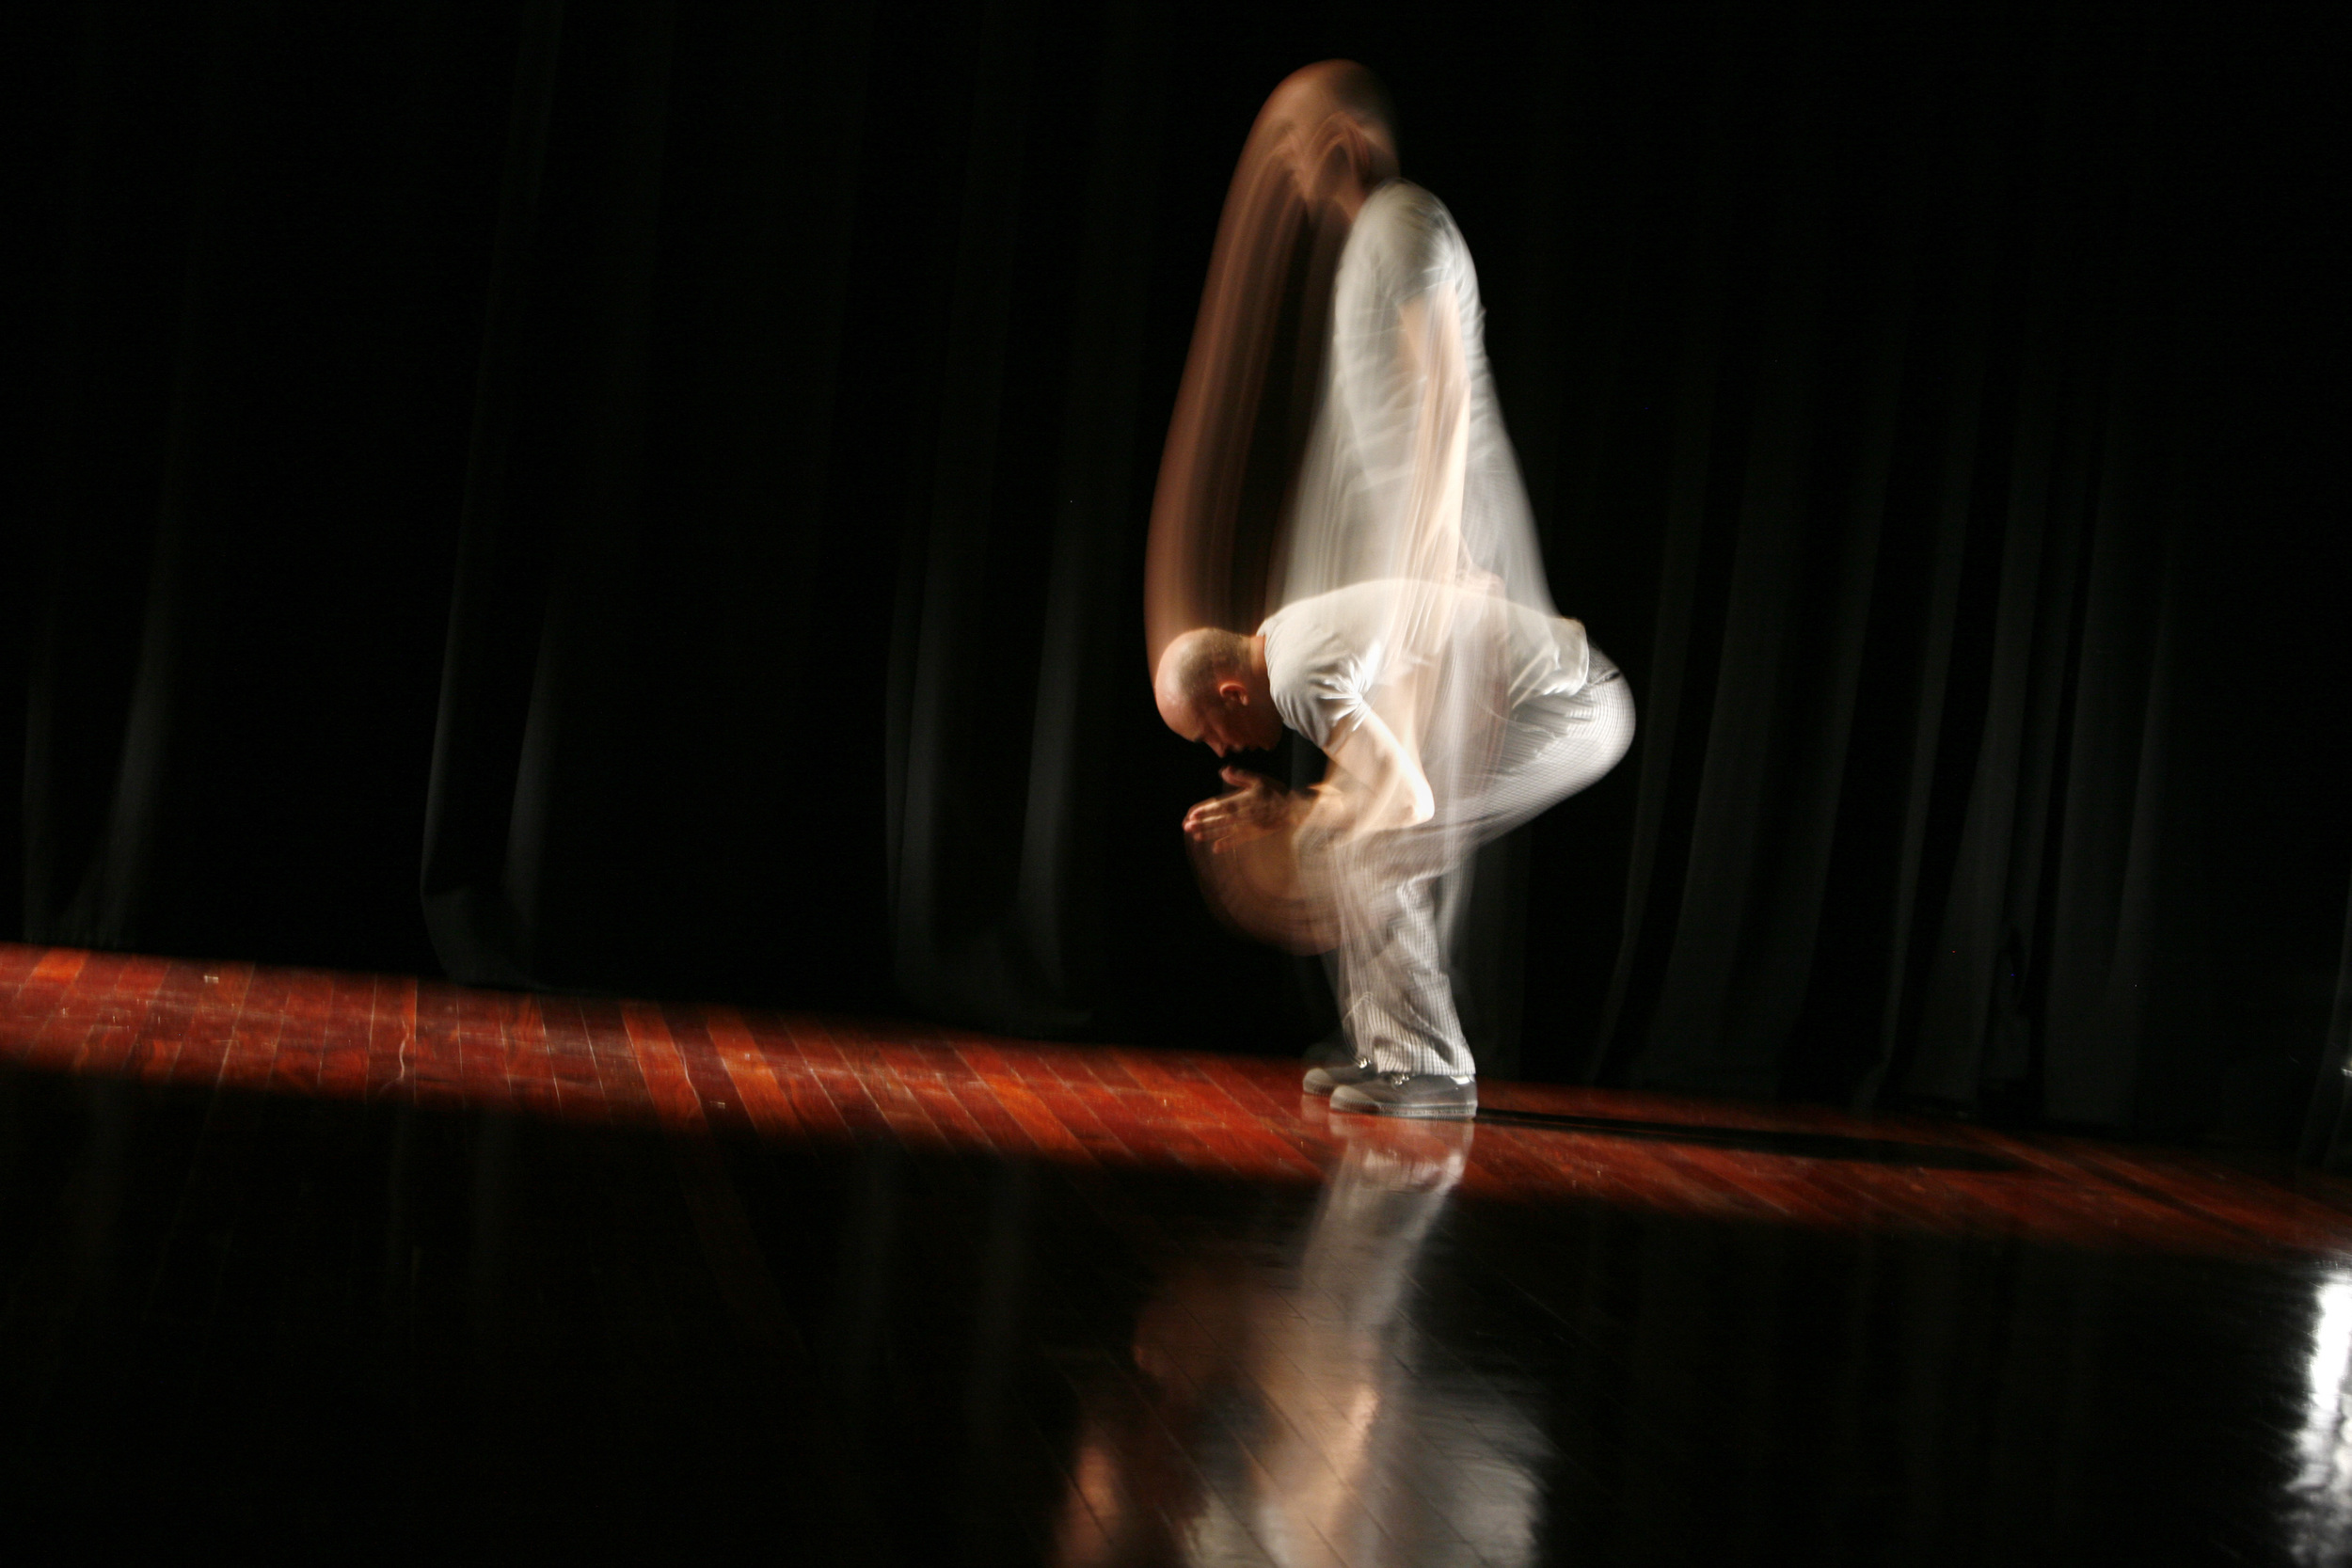 'The Corridor' Dancehouse 2006. Funded by Ewa Czajor Award for Female Theatre Directors